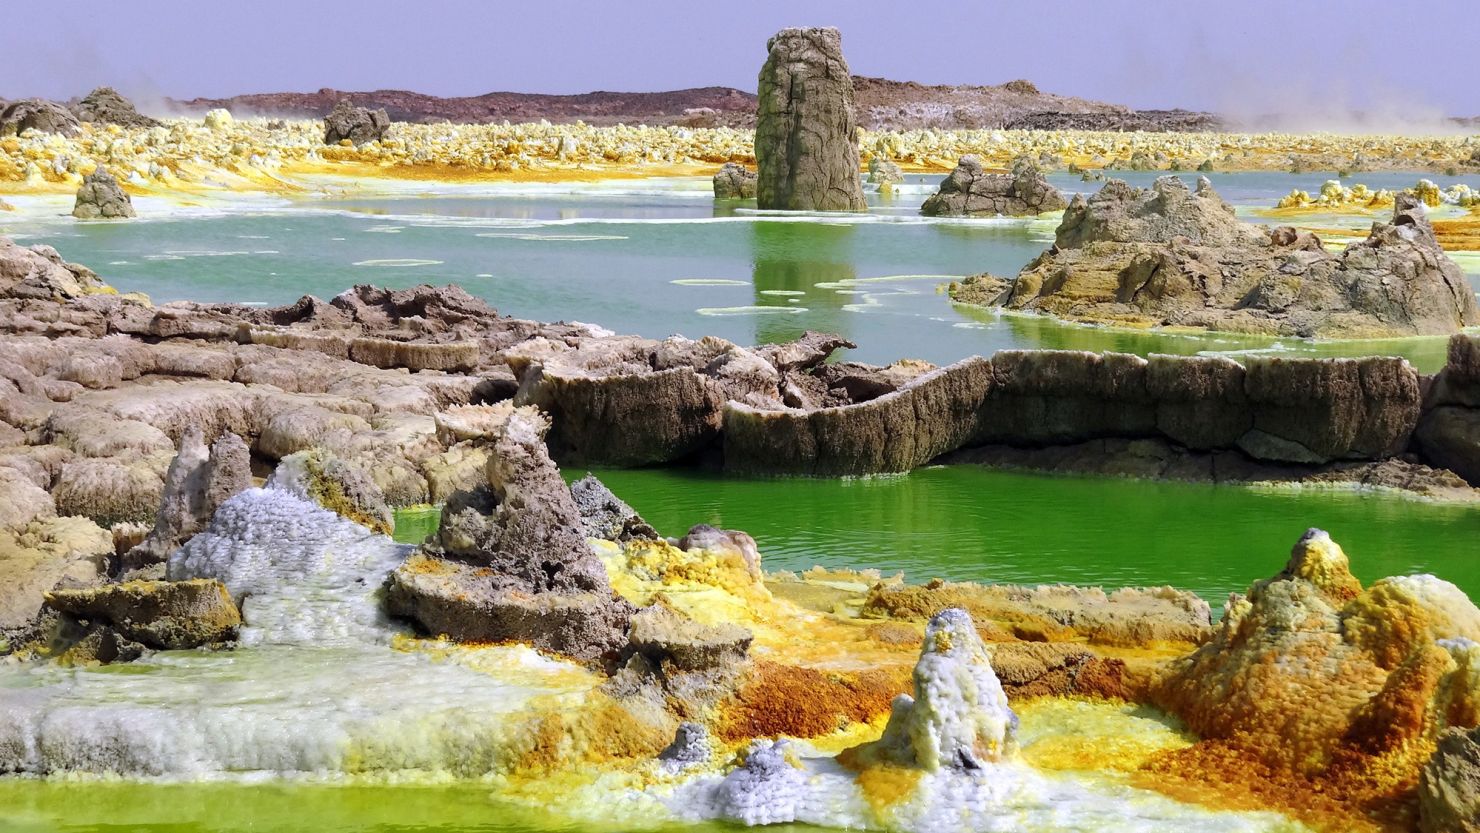 Ethiopia's geothermal field Dallol is full of acidic, salty and hot ponds that don't allow life to form. 